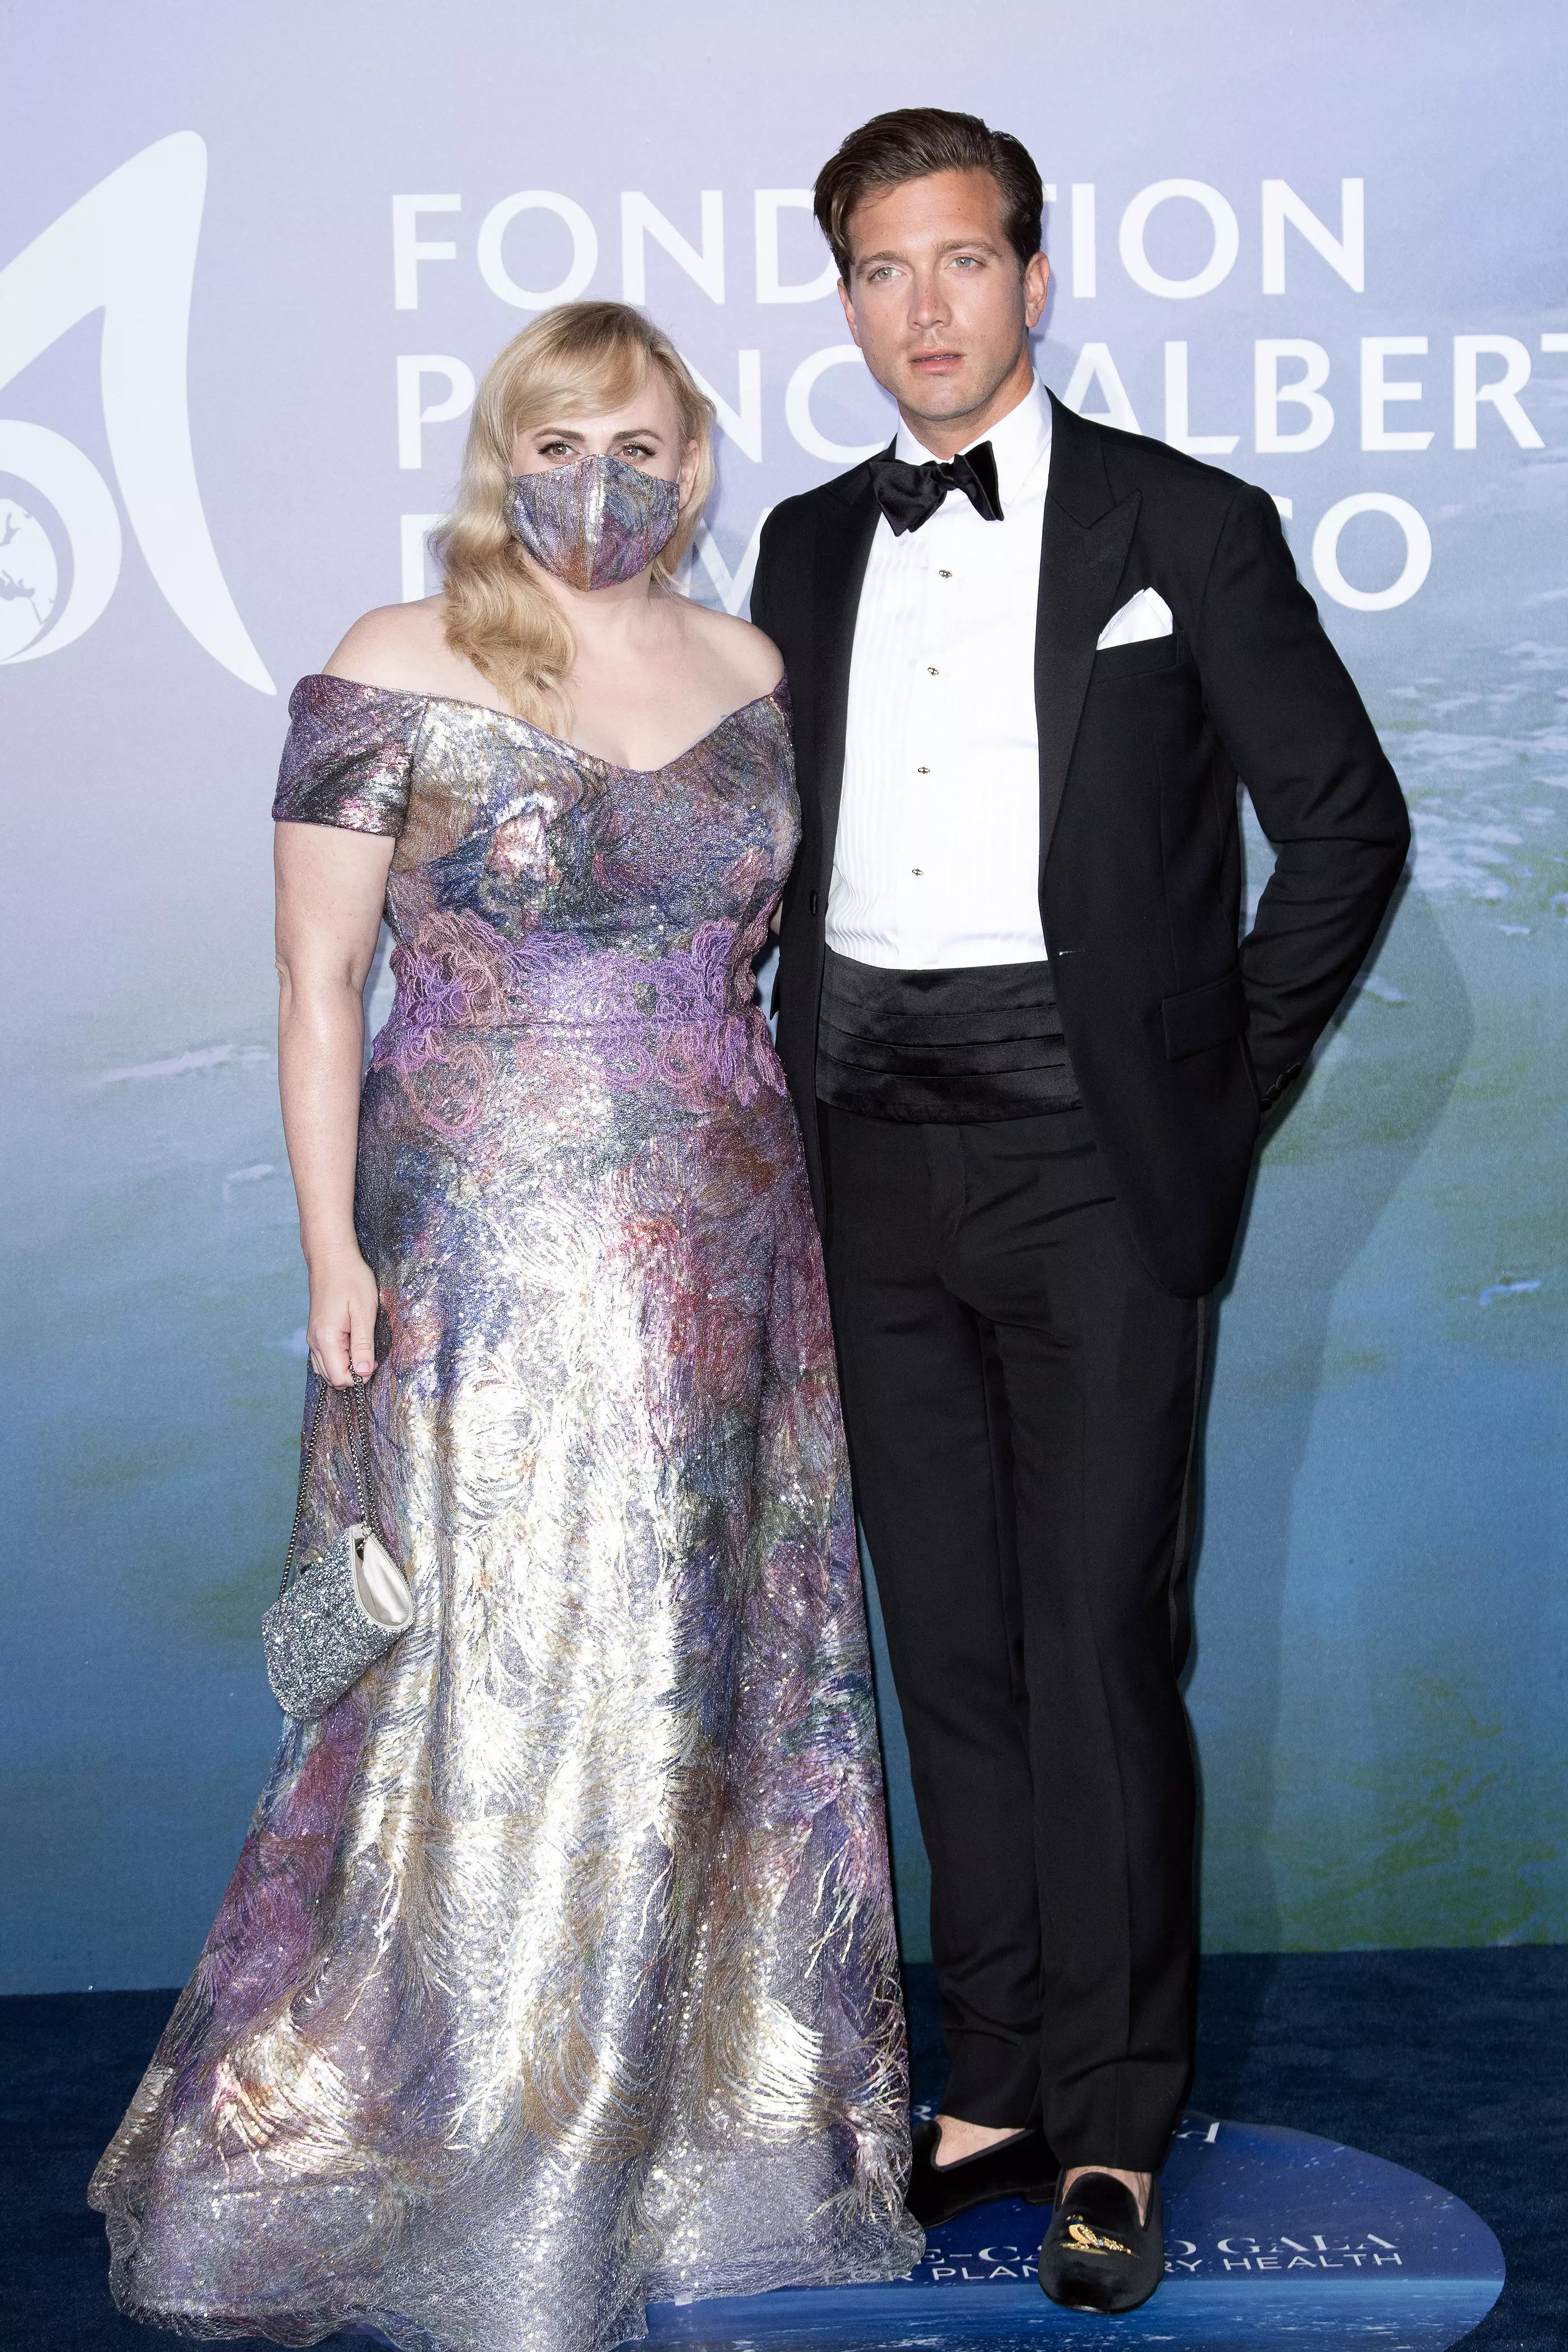 The couple were pictured together at a gala.